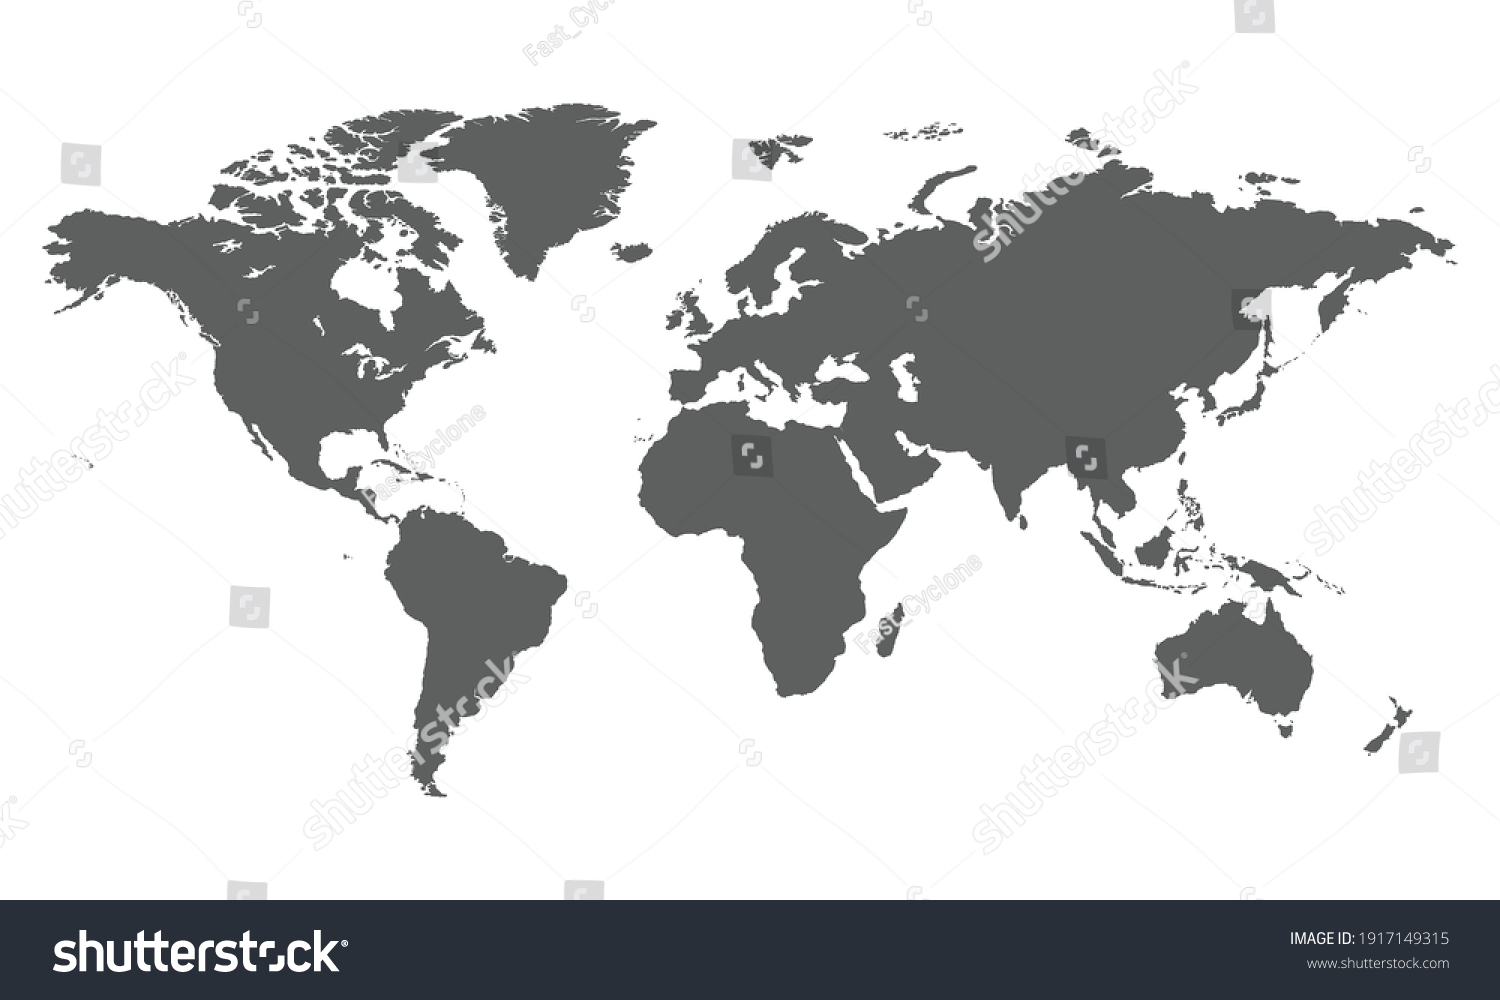 World map. Gray map template for website pattern. Vector illustration of flat Earth isolated on white background. World map icon. Flat globe silhouette. Surface of continents. Simple design. #1917149315